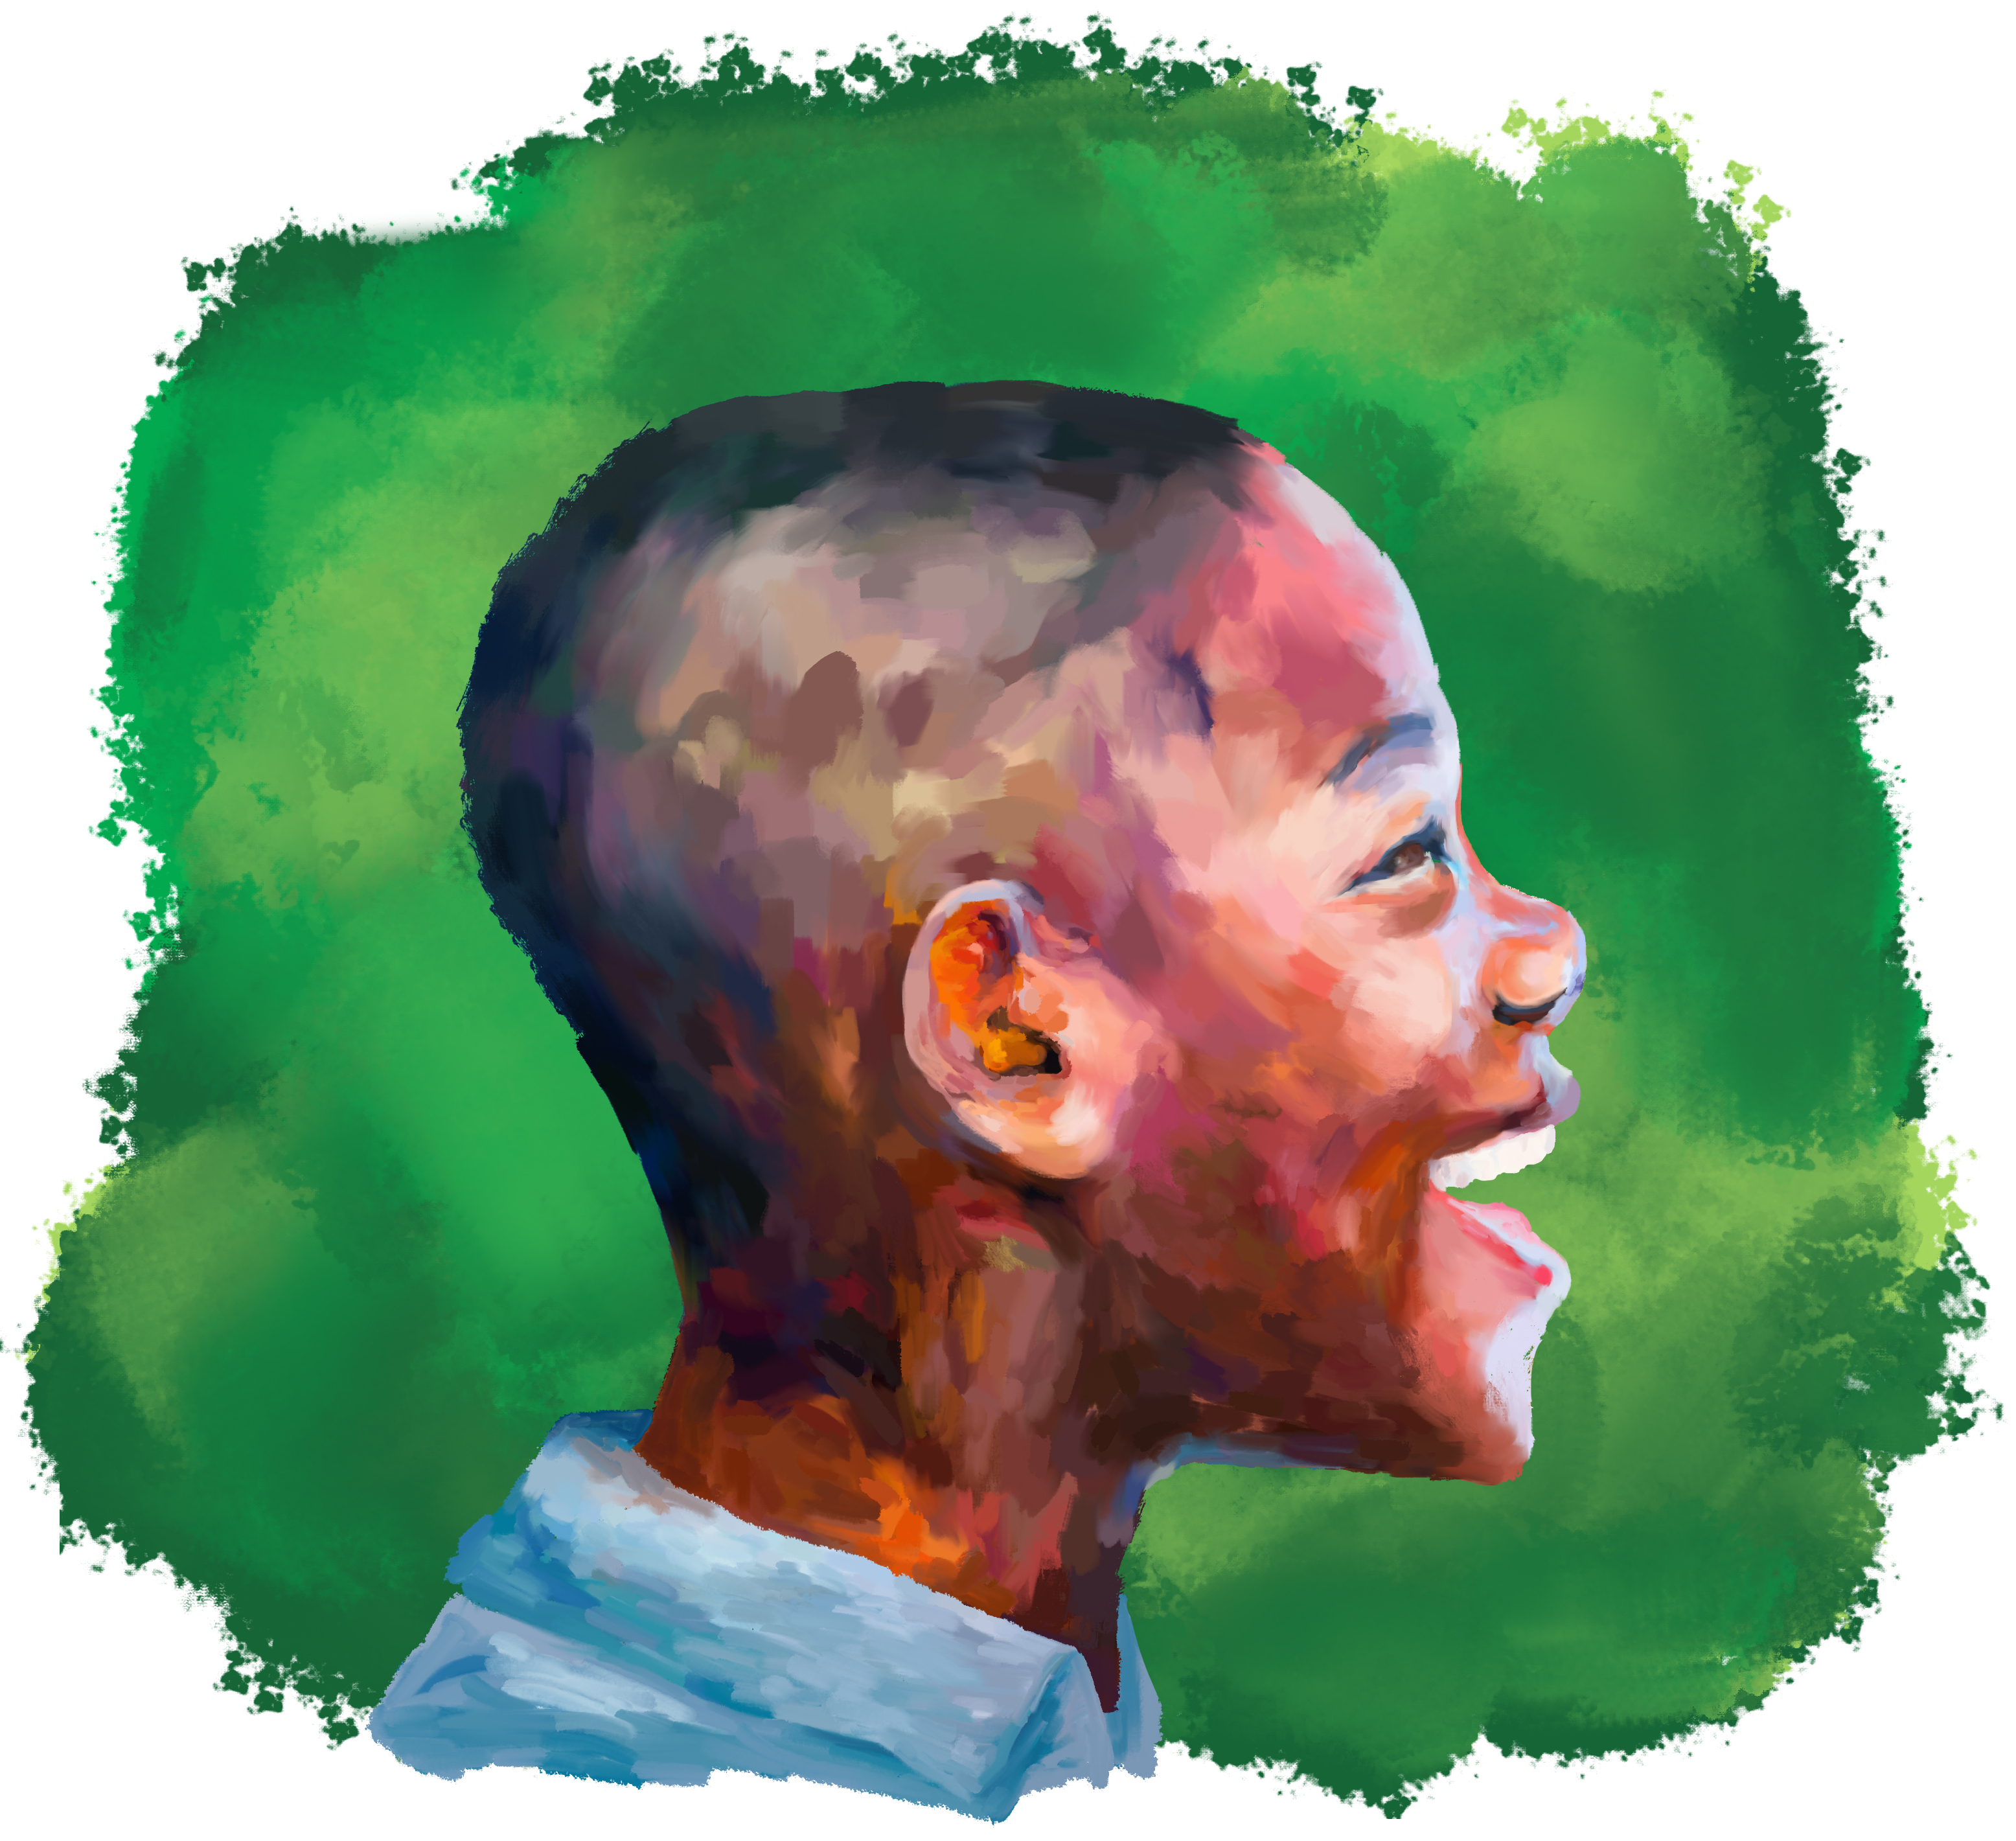 Oil painting of the bust of a smiling African American boy in profile. The background is a wash of green.